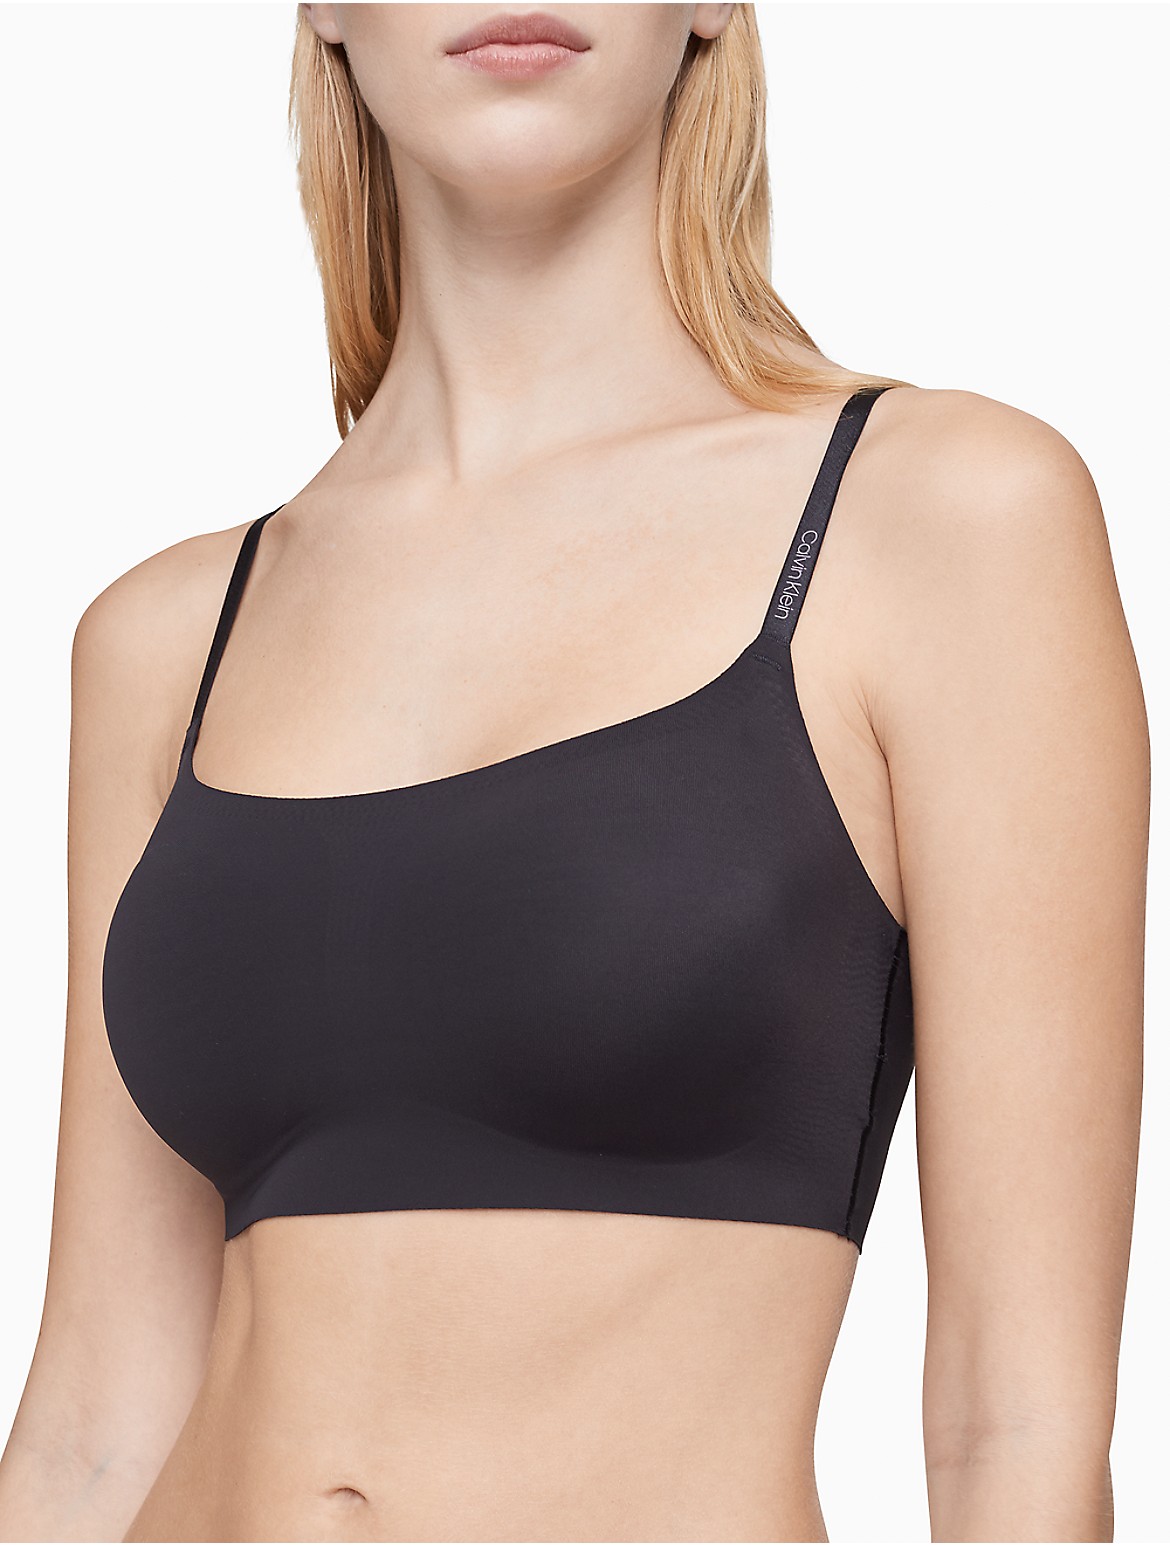 Calvin Klein Women's Invisibles Wirefree Lightly Lined Bralette - Black - M